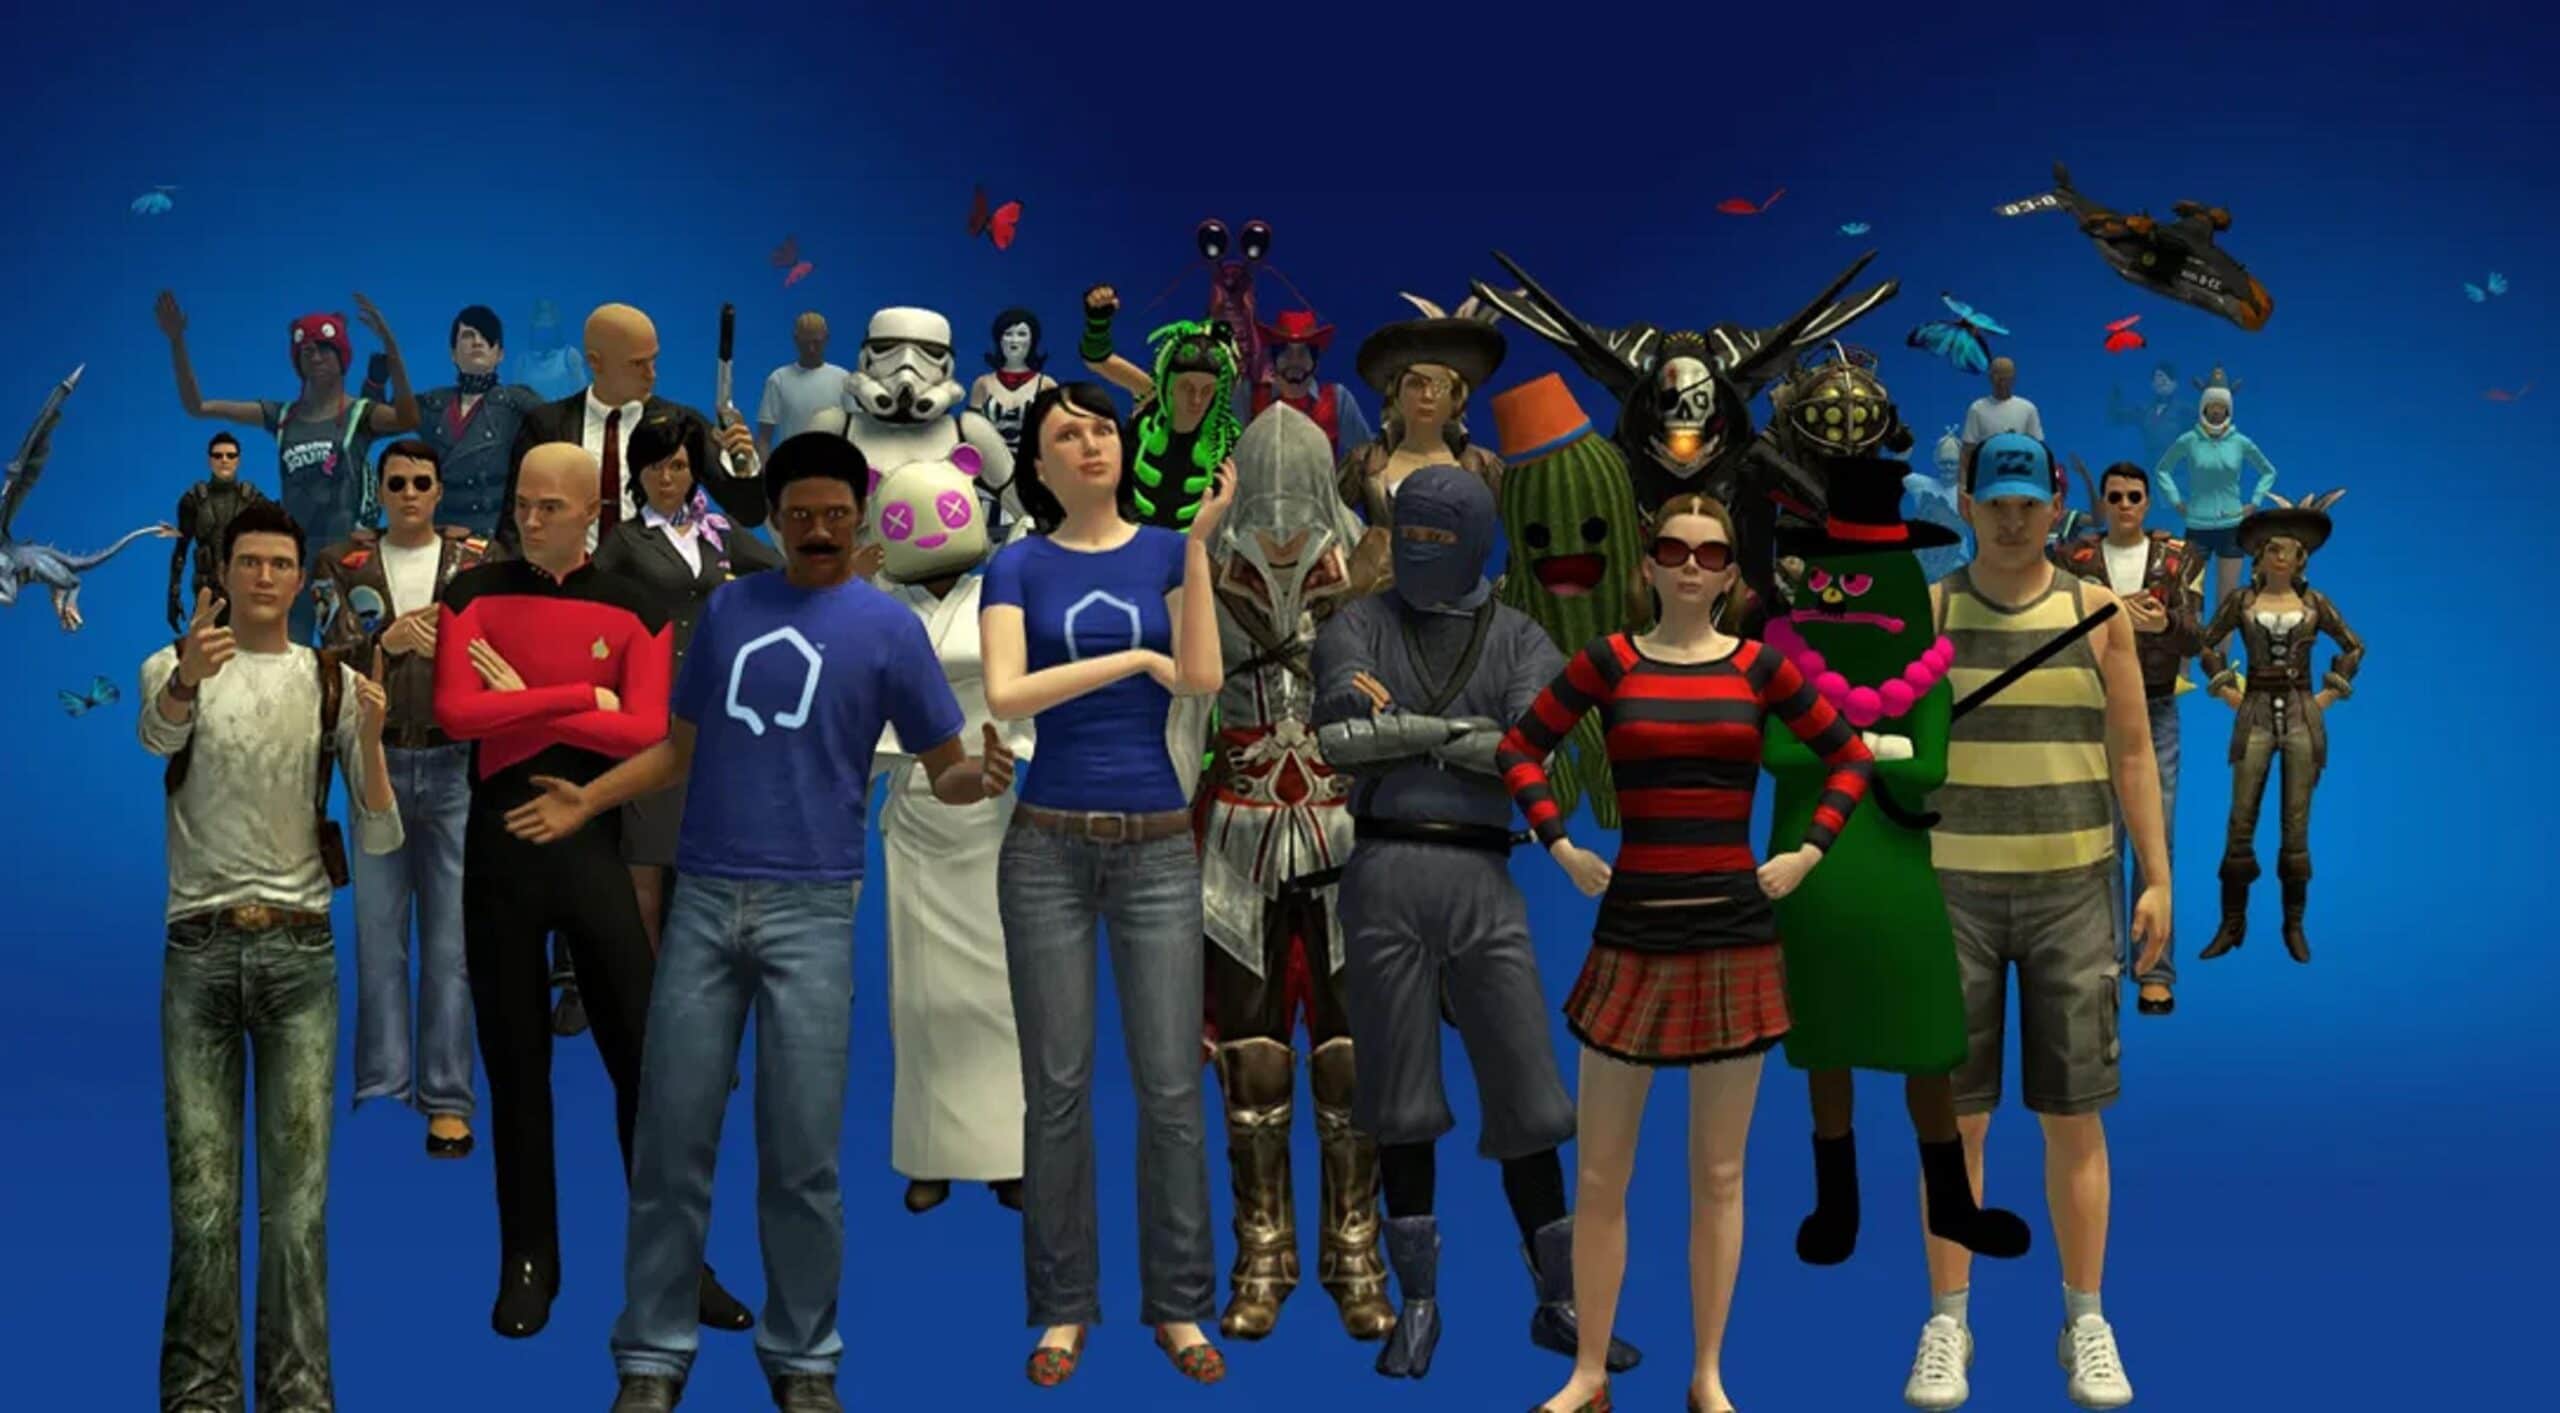 PlayStation Home